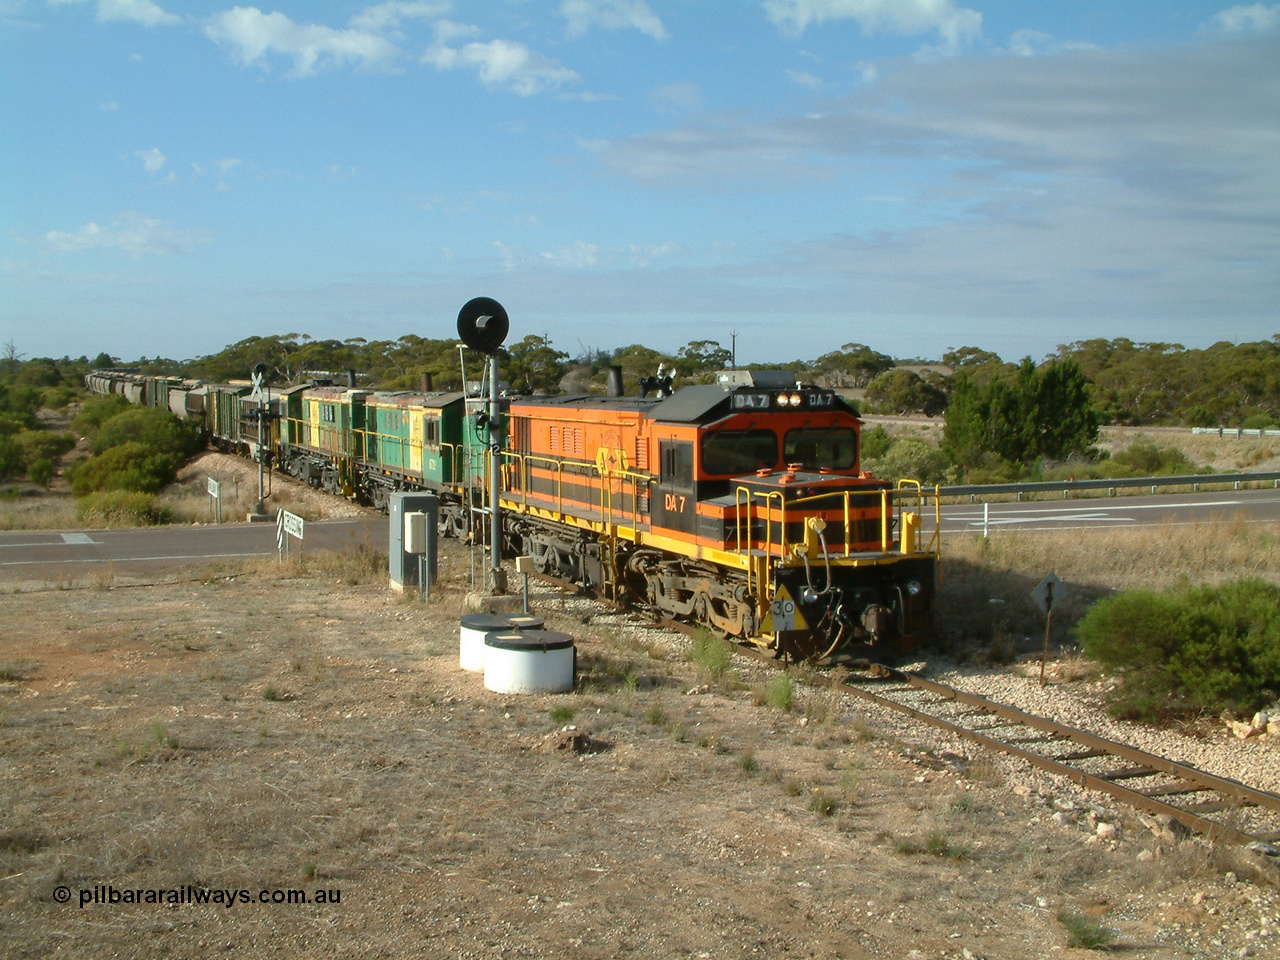 030409 084528
Kyancutta, empty grain train arrives across the Eyre Highway grade crossing behind rebuild DA class unit DA 7 in Australian Southern orange and black livery leading a pair of AE Goodwin built ALCo model DL531 830 class units 872 and 871 with a string of grain waggons.
Keywords: DA-class;DA7;83713;Port-Augusta-WS;ALCo;DL531G/1;48-class;4813;rebuild;